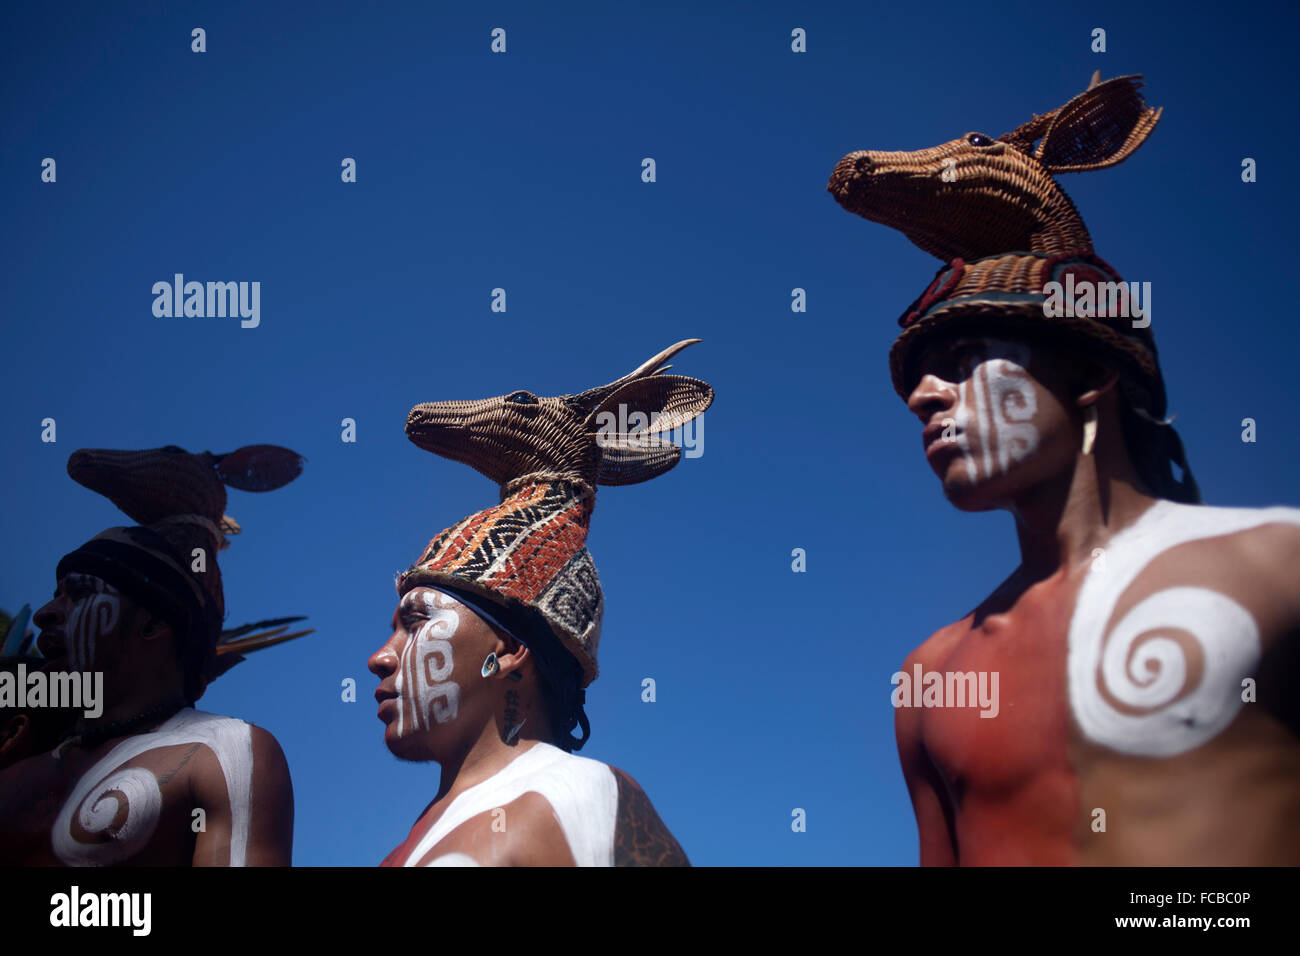 Mayan ball players from ?Pucxical Keej? team of Playa del Carmen, Quintana Roo, during the first ®Pok Ta Pok® World Cup in Stock Photo